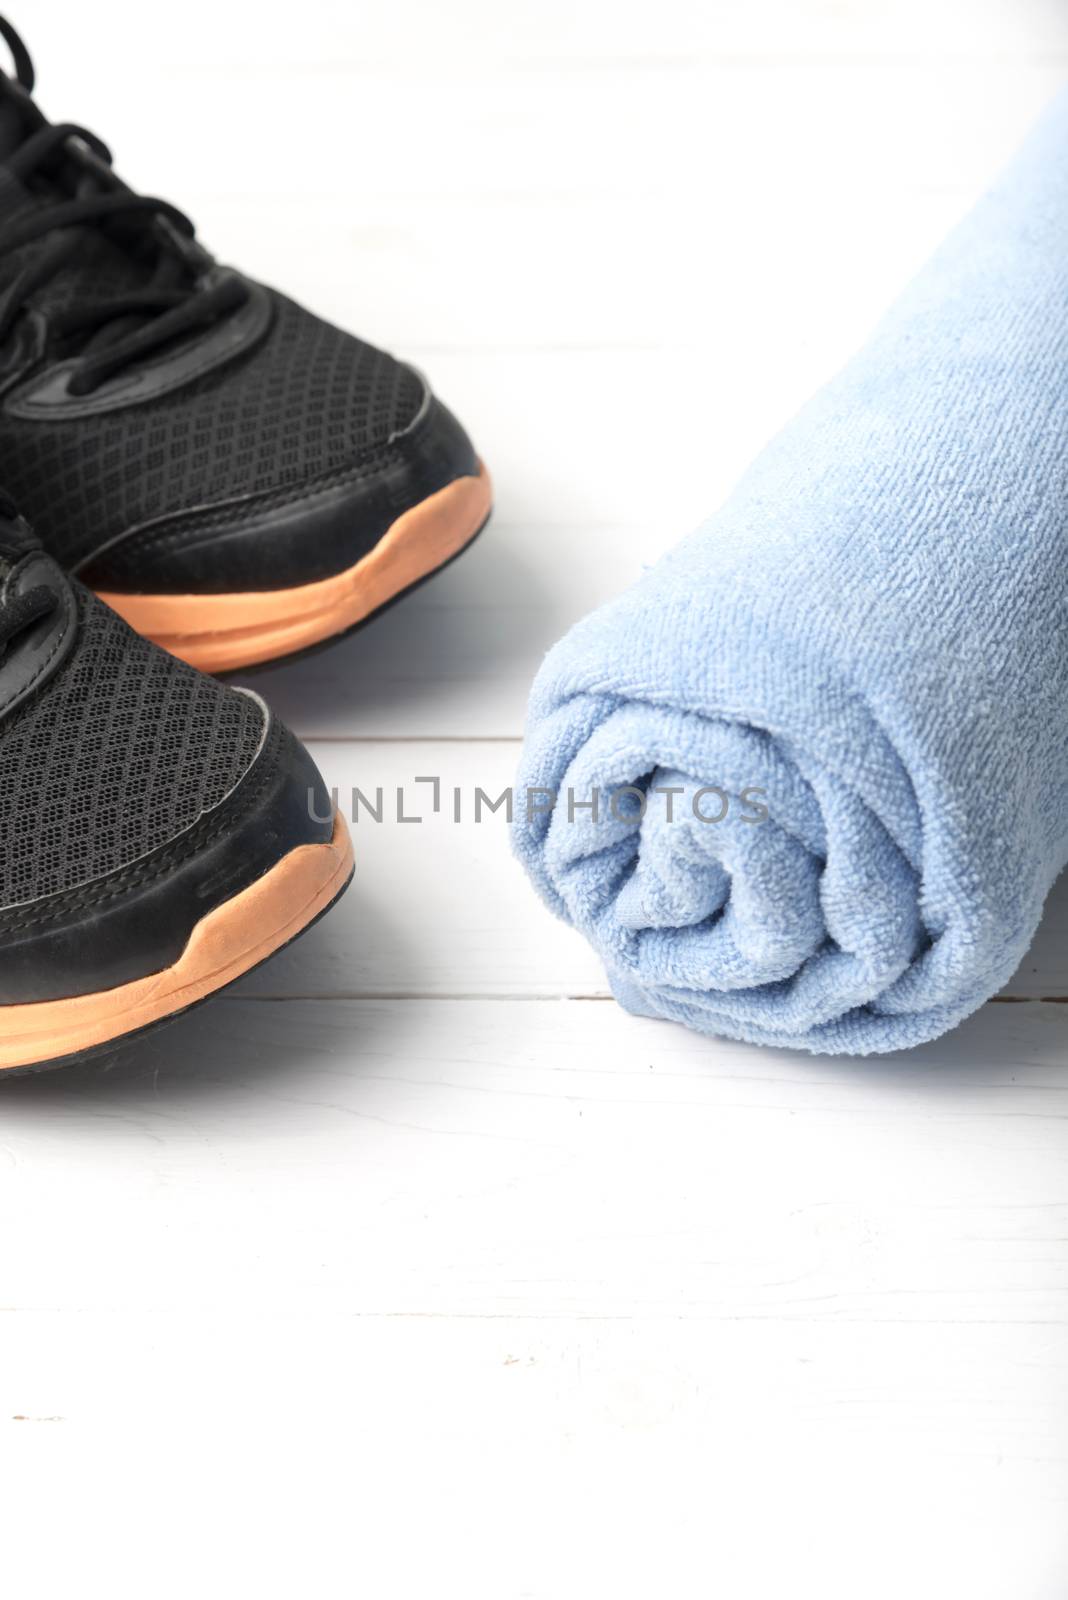 running shoes and towel by ammza12